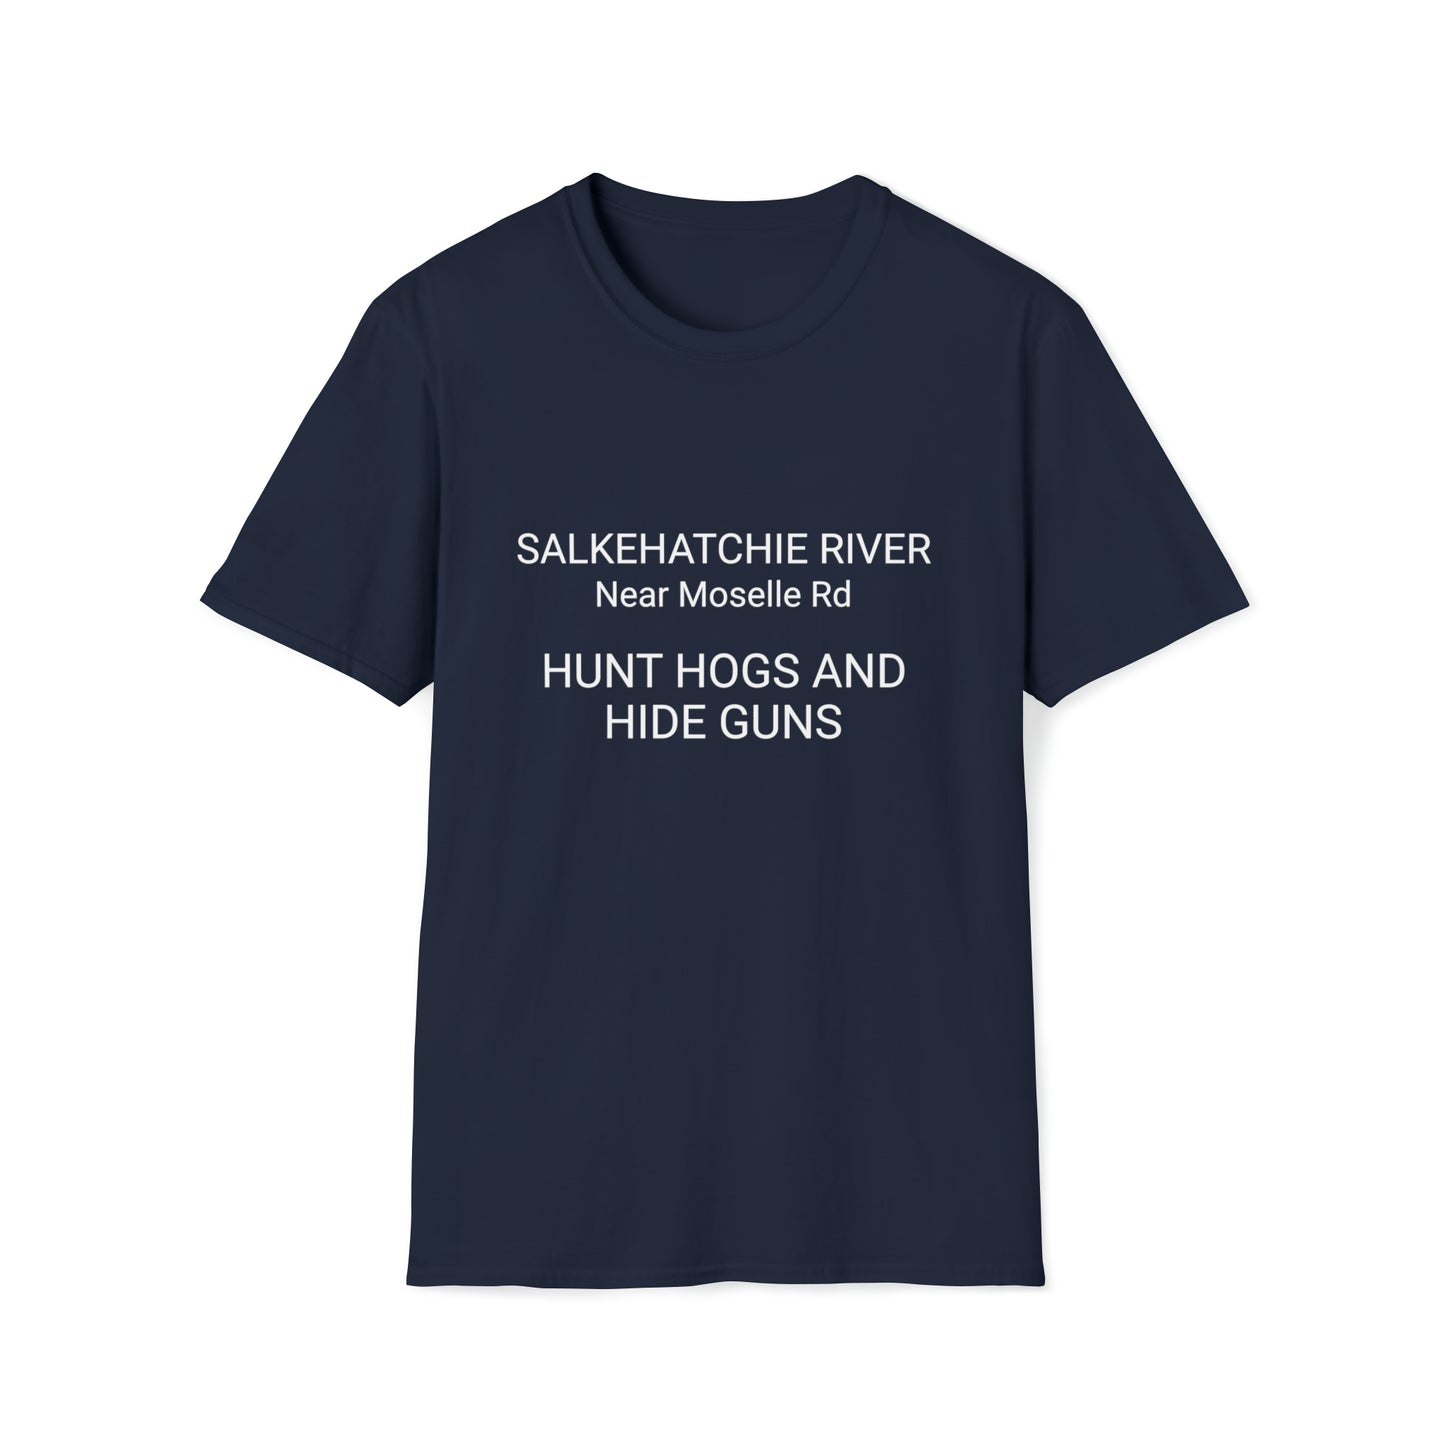 SALKEHATCHIE RIVER RAFTING GUIDE Softstyle T-Shirt